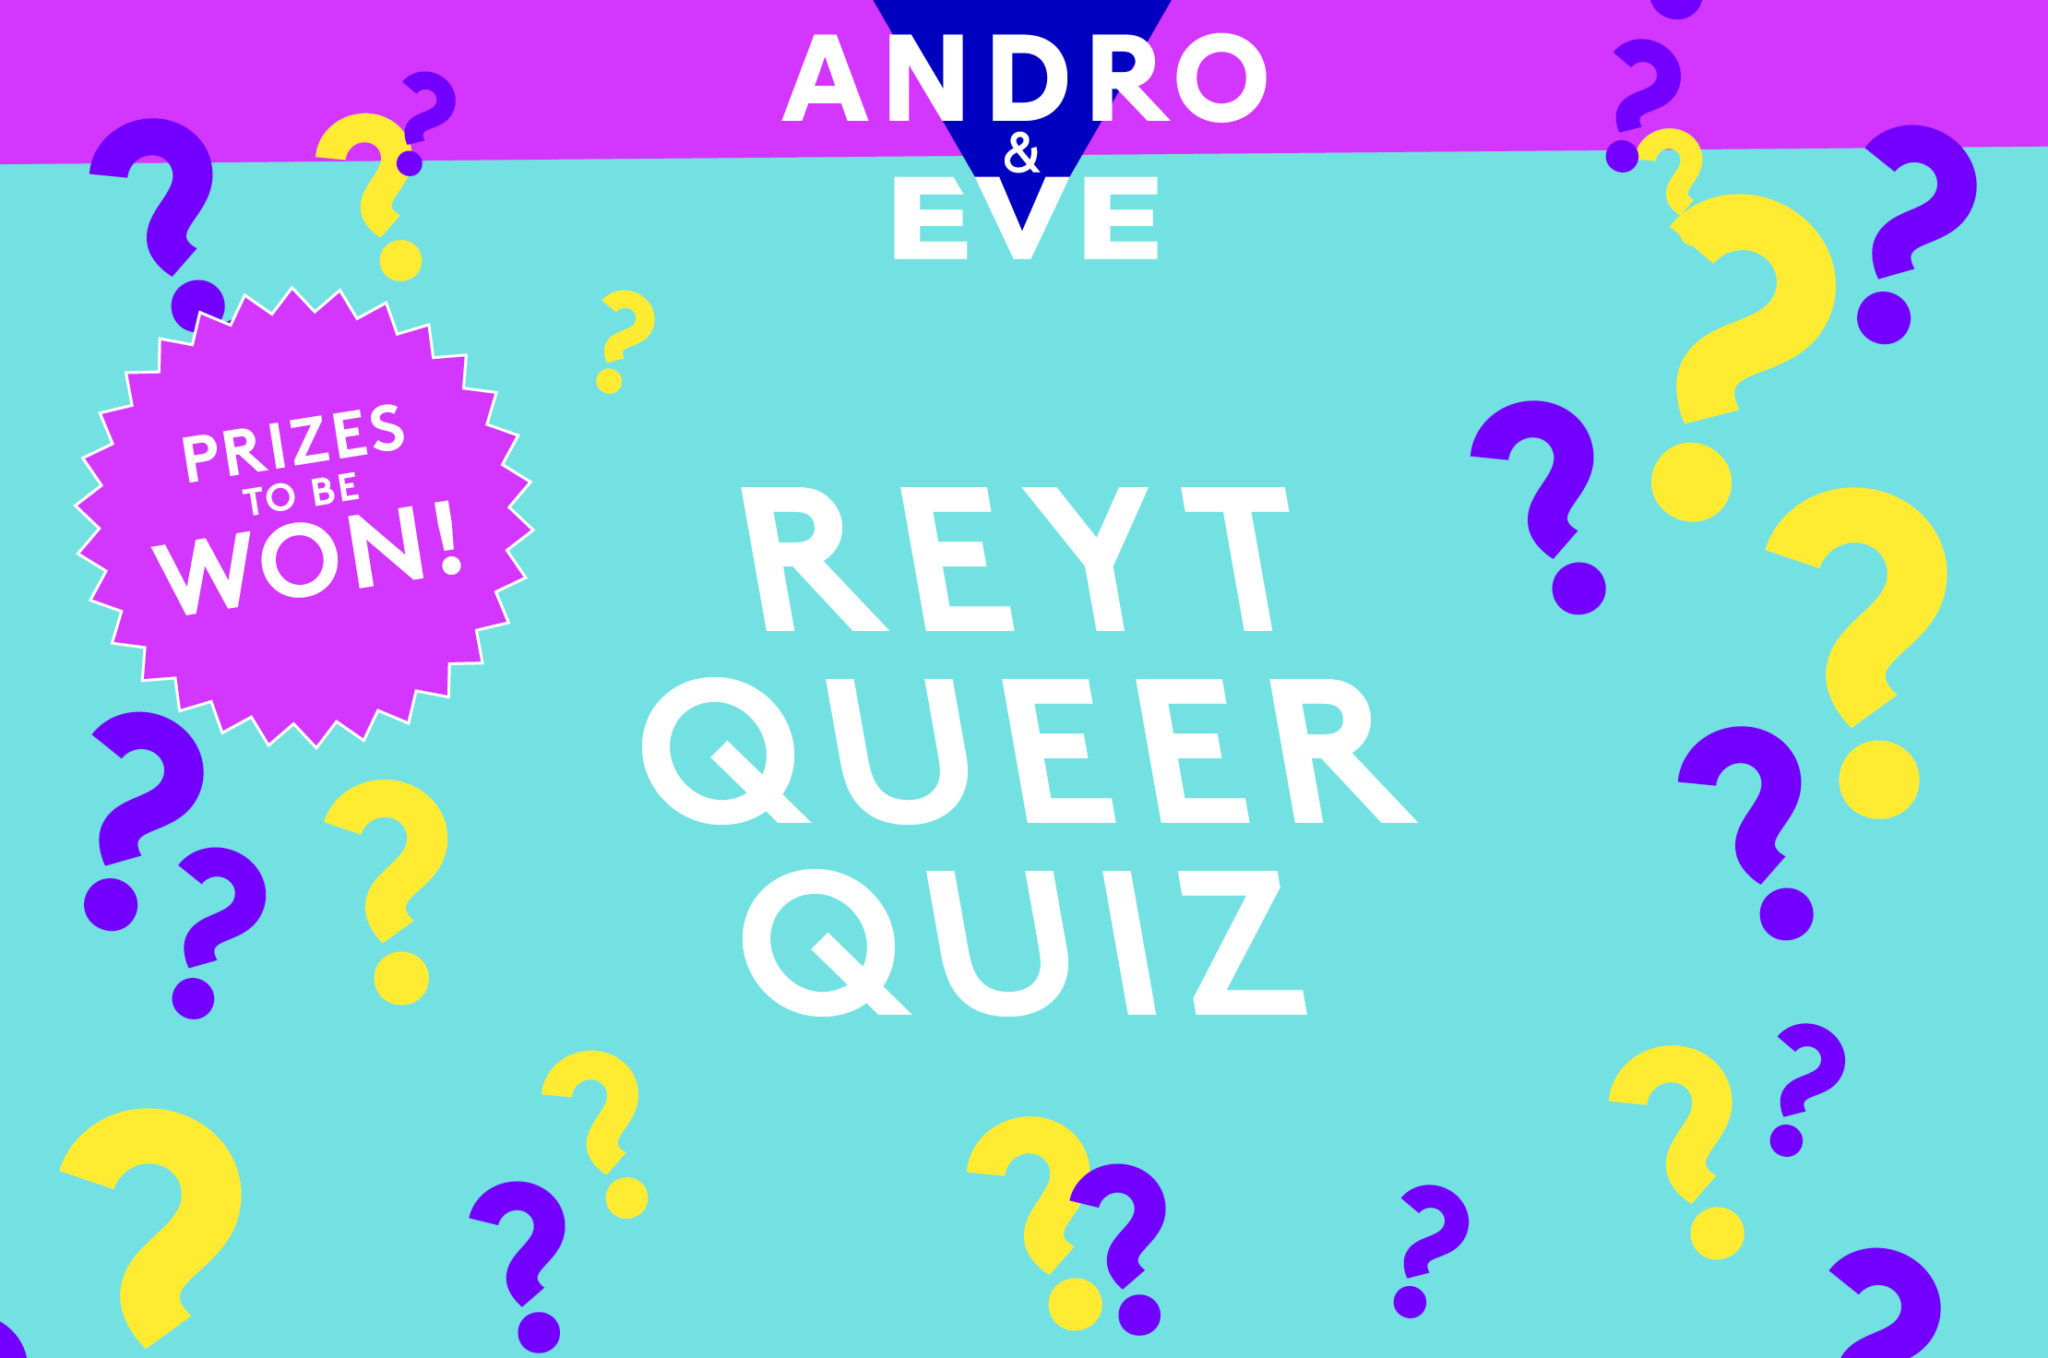 The words reyt queer quiz are surrounded by uellow and purple question marks on a turquoise background